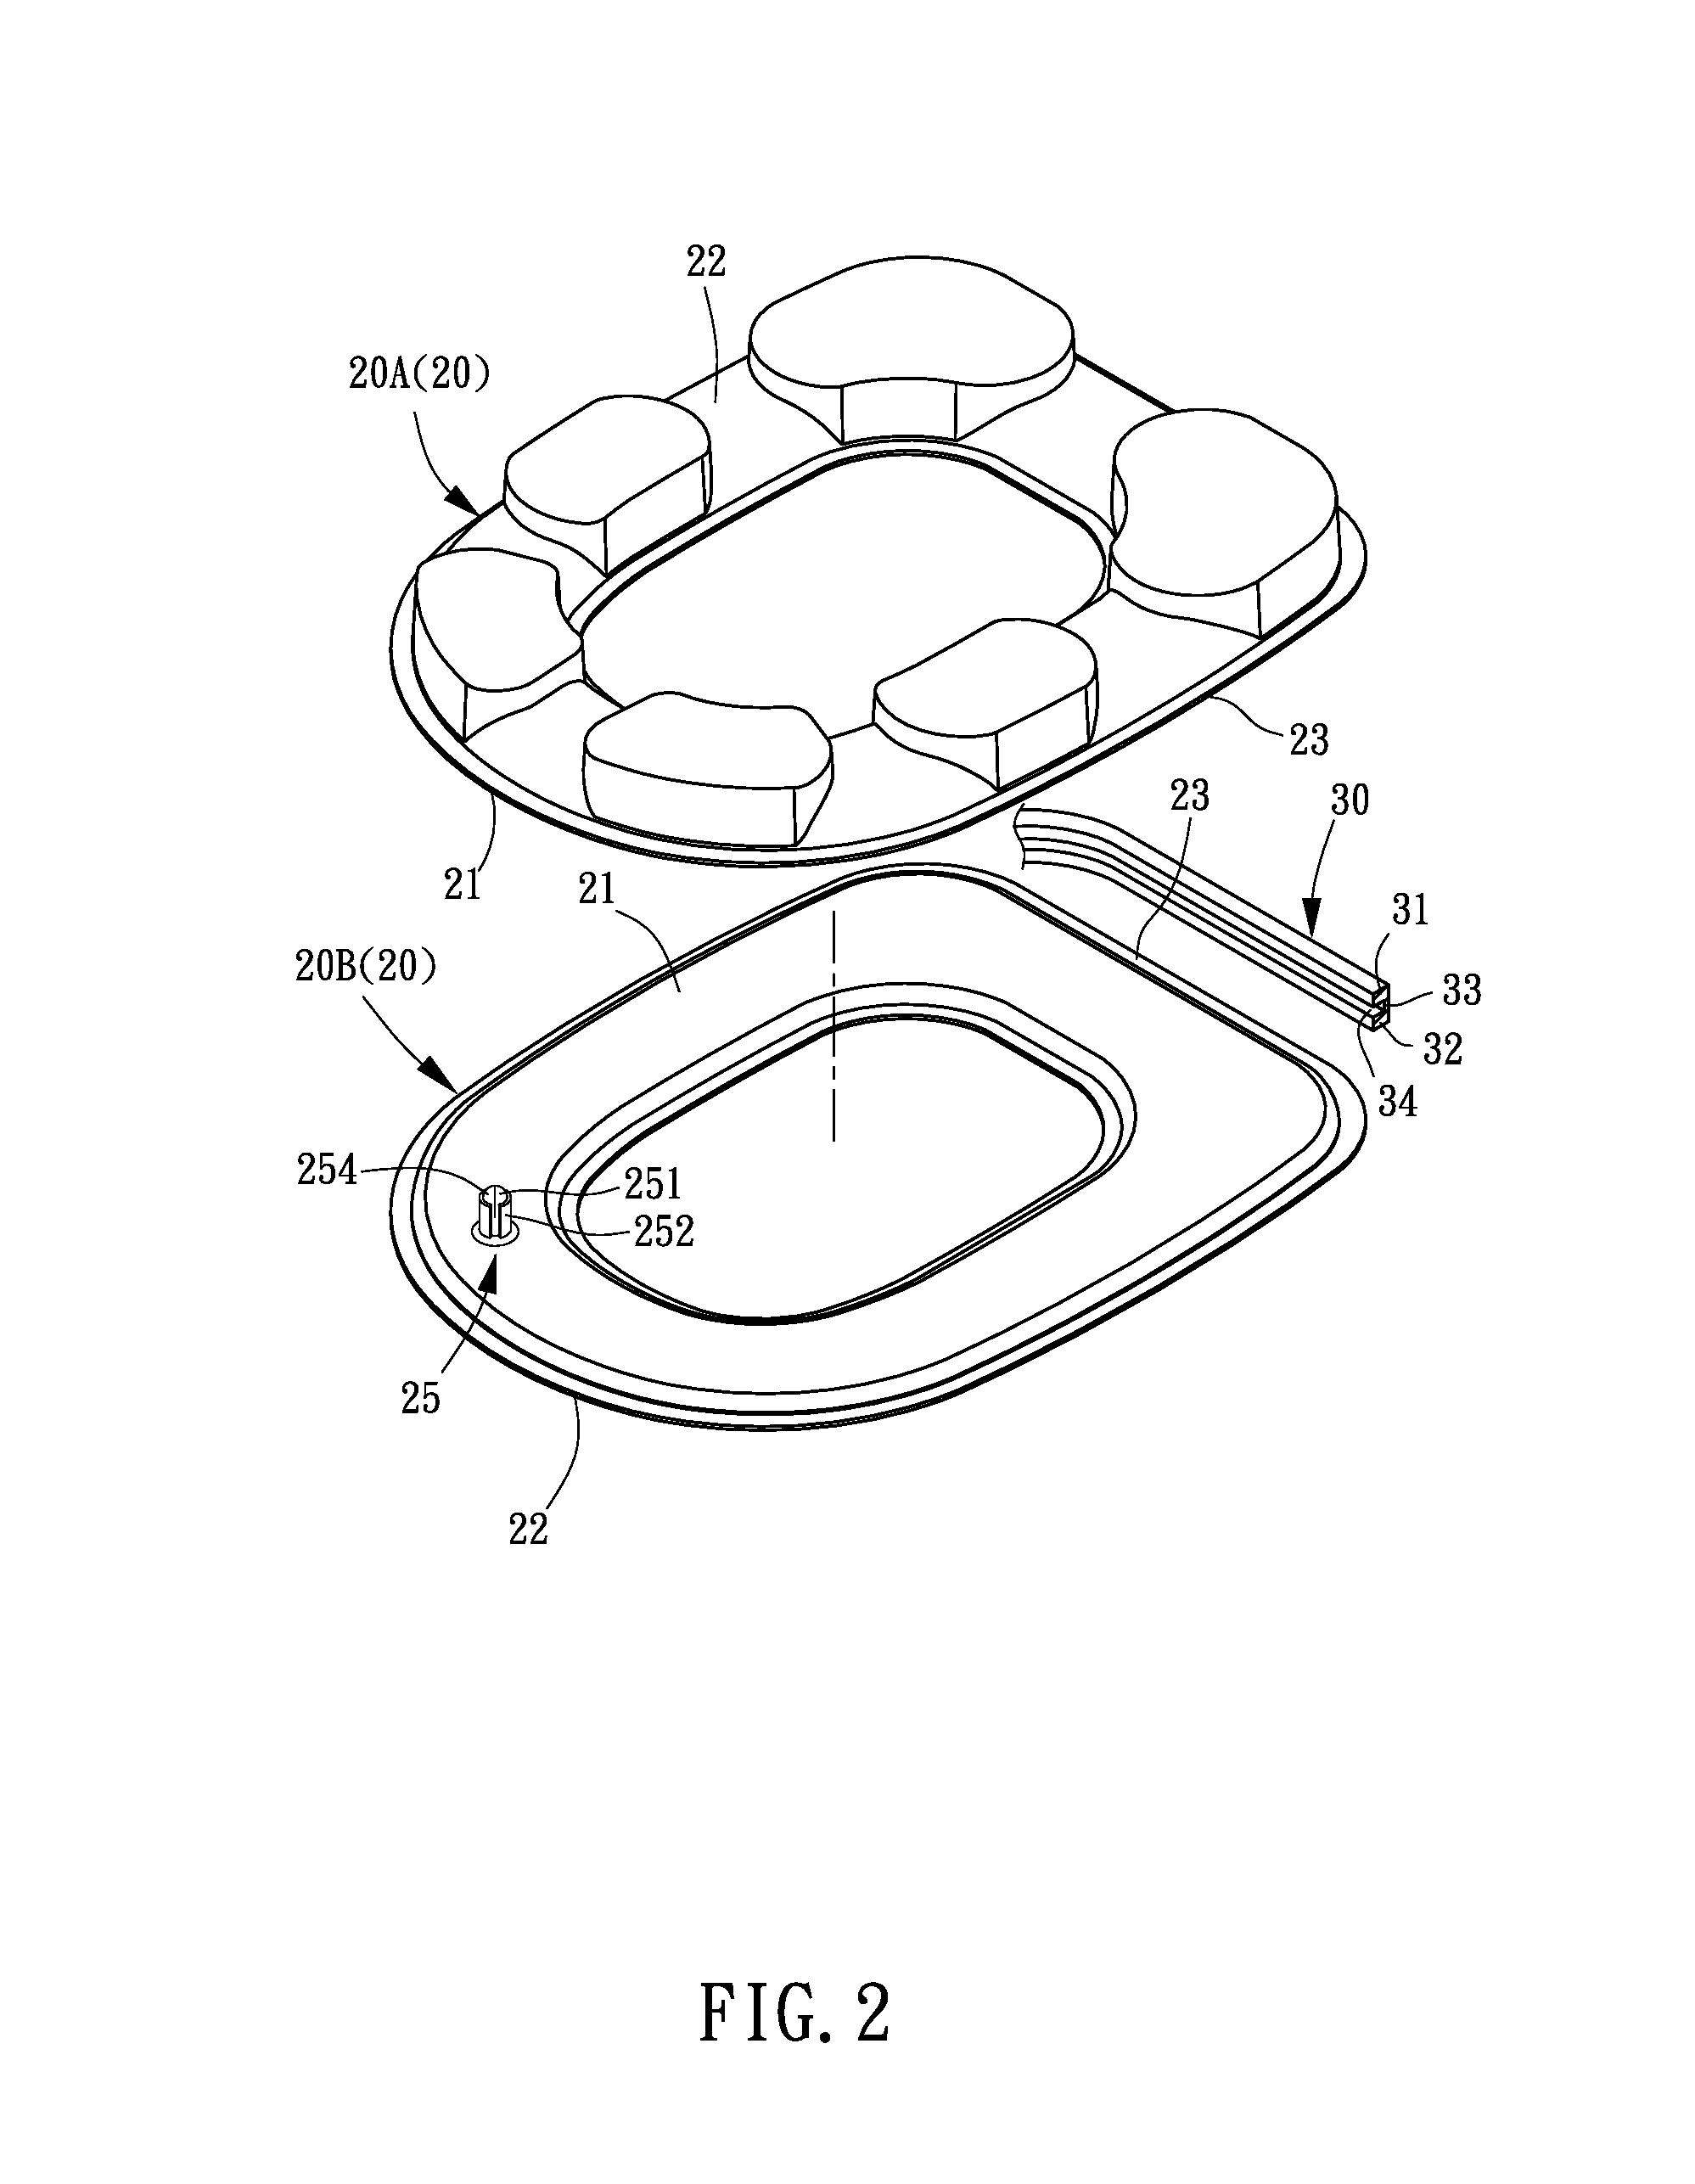 Air pressure adjustable elastic body used in shoe sole as a shock absorber